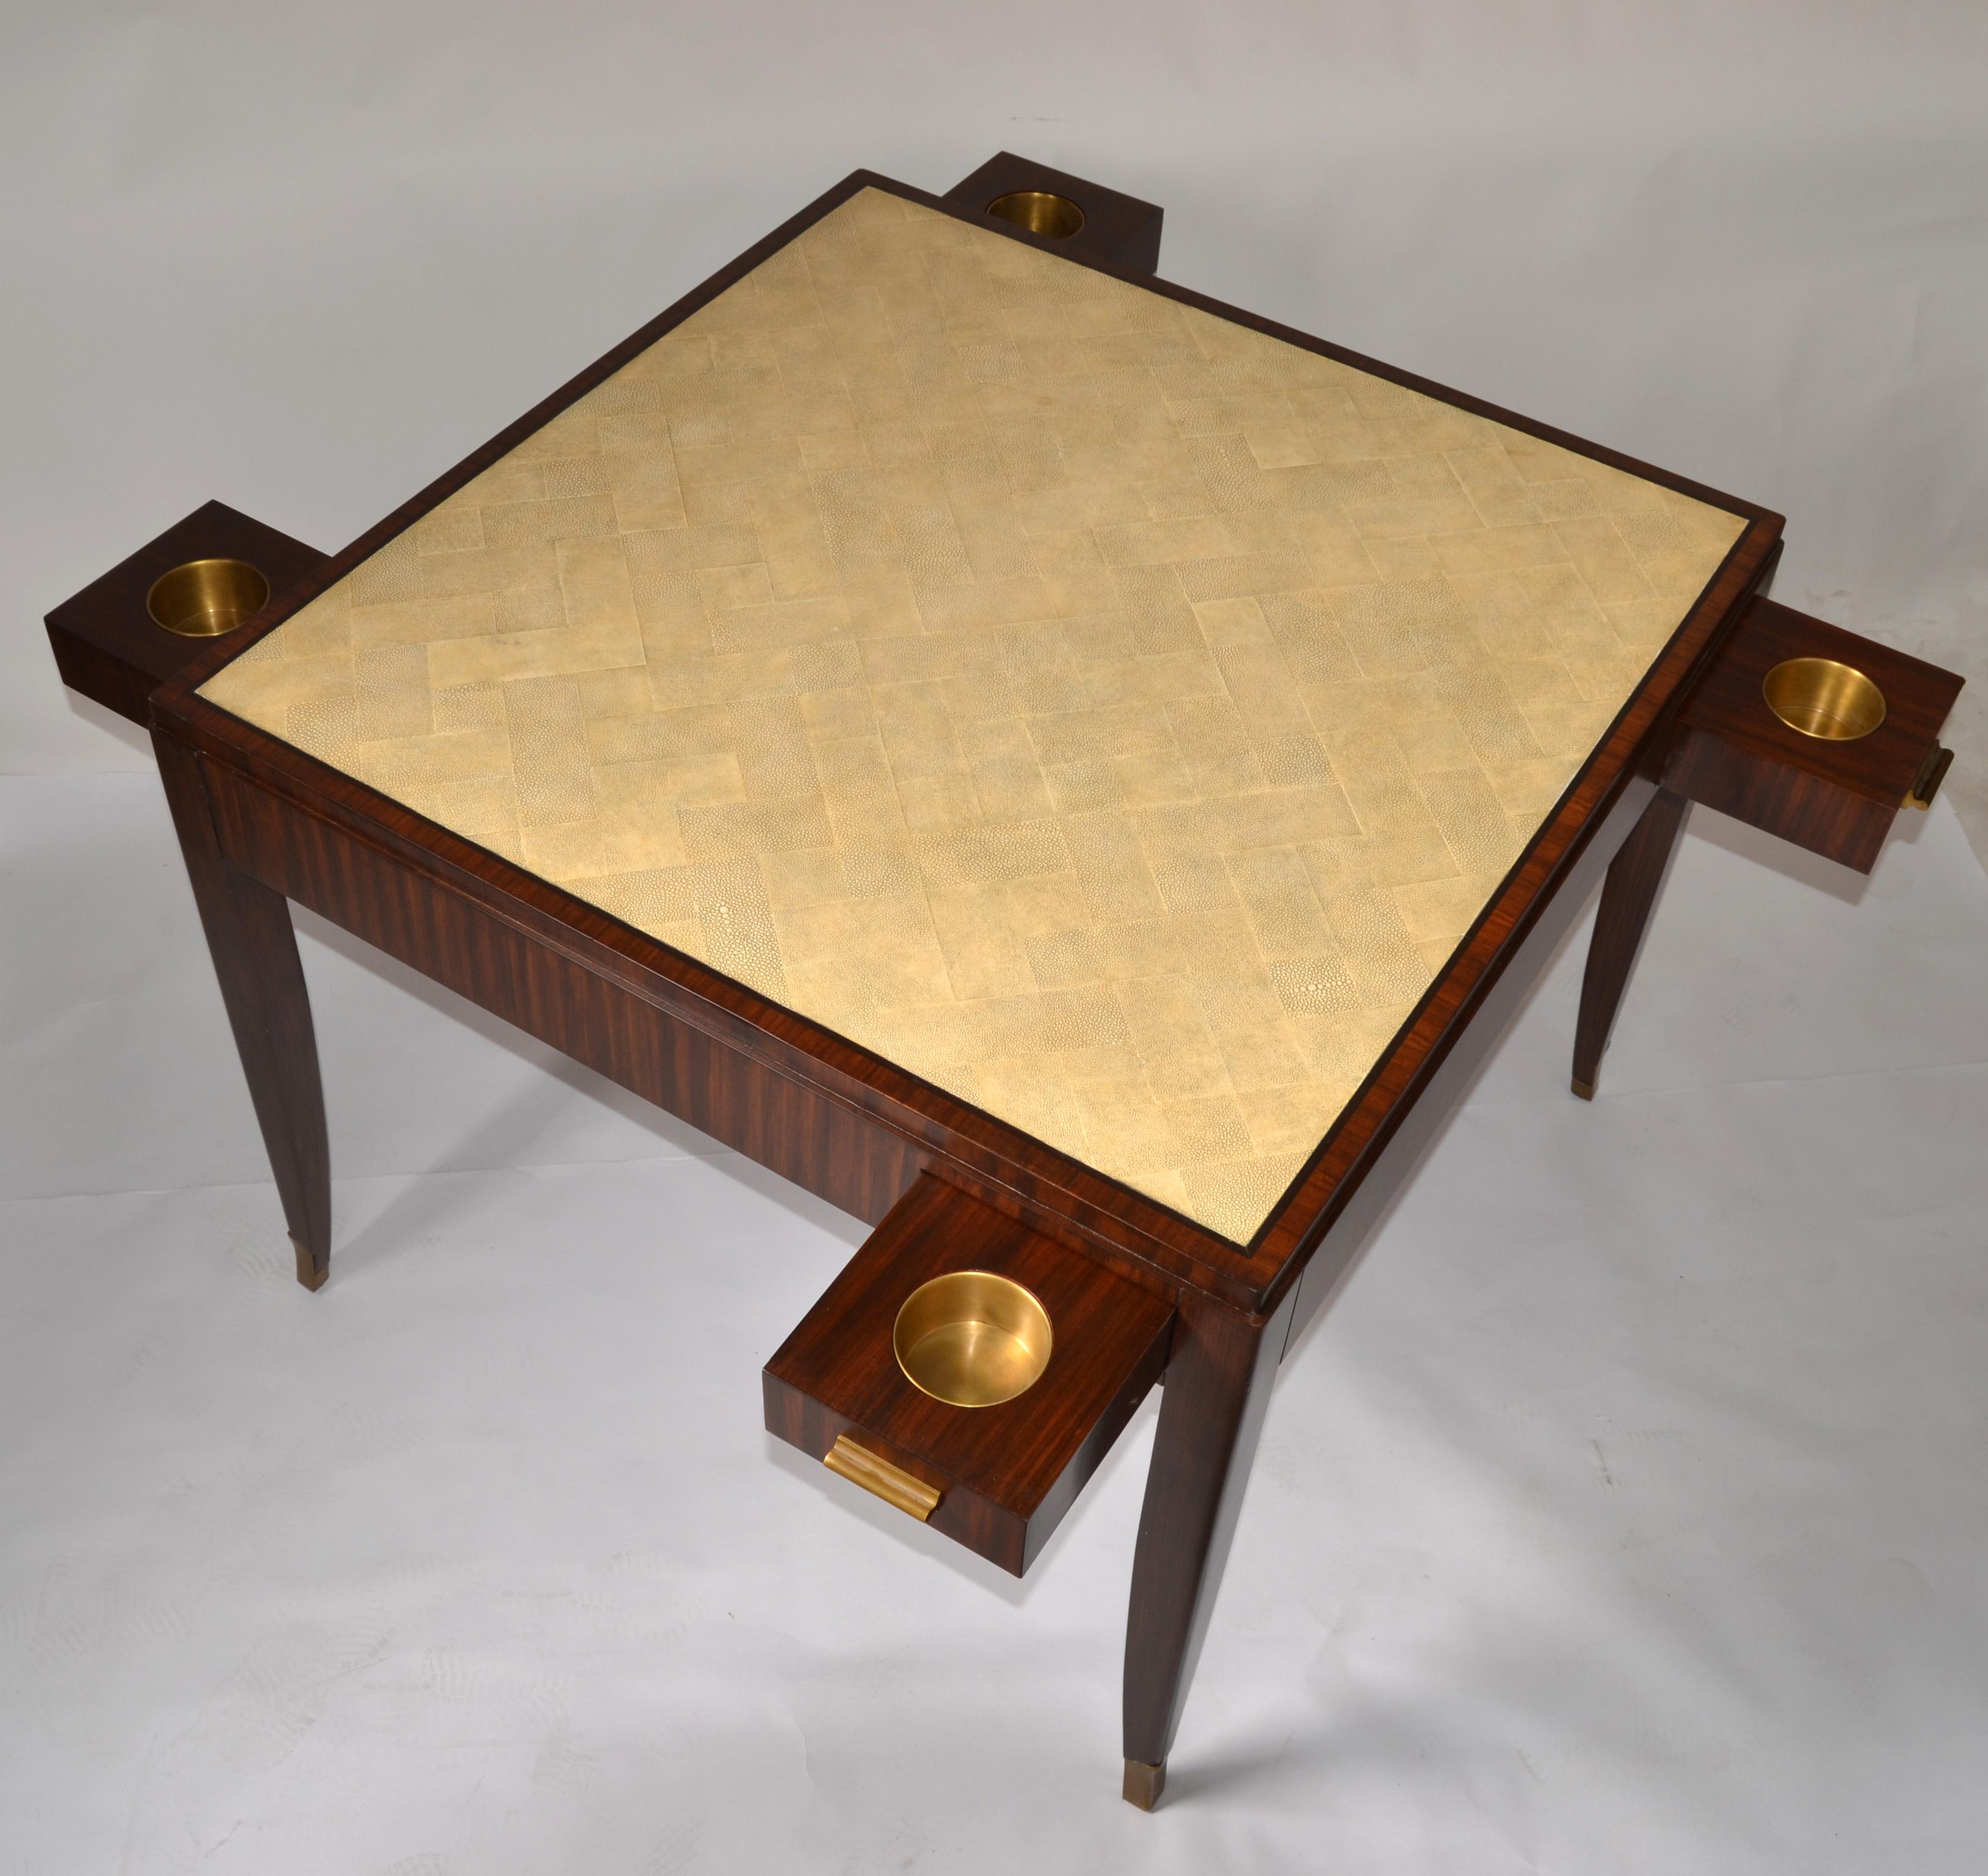 Hand-Crafted 1990s Maitland Smith Macassar Wood Shagreen Square Game Table Mid-Century Modern